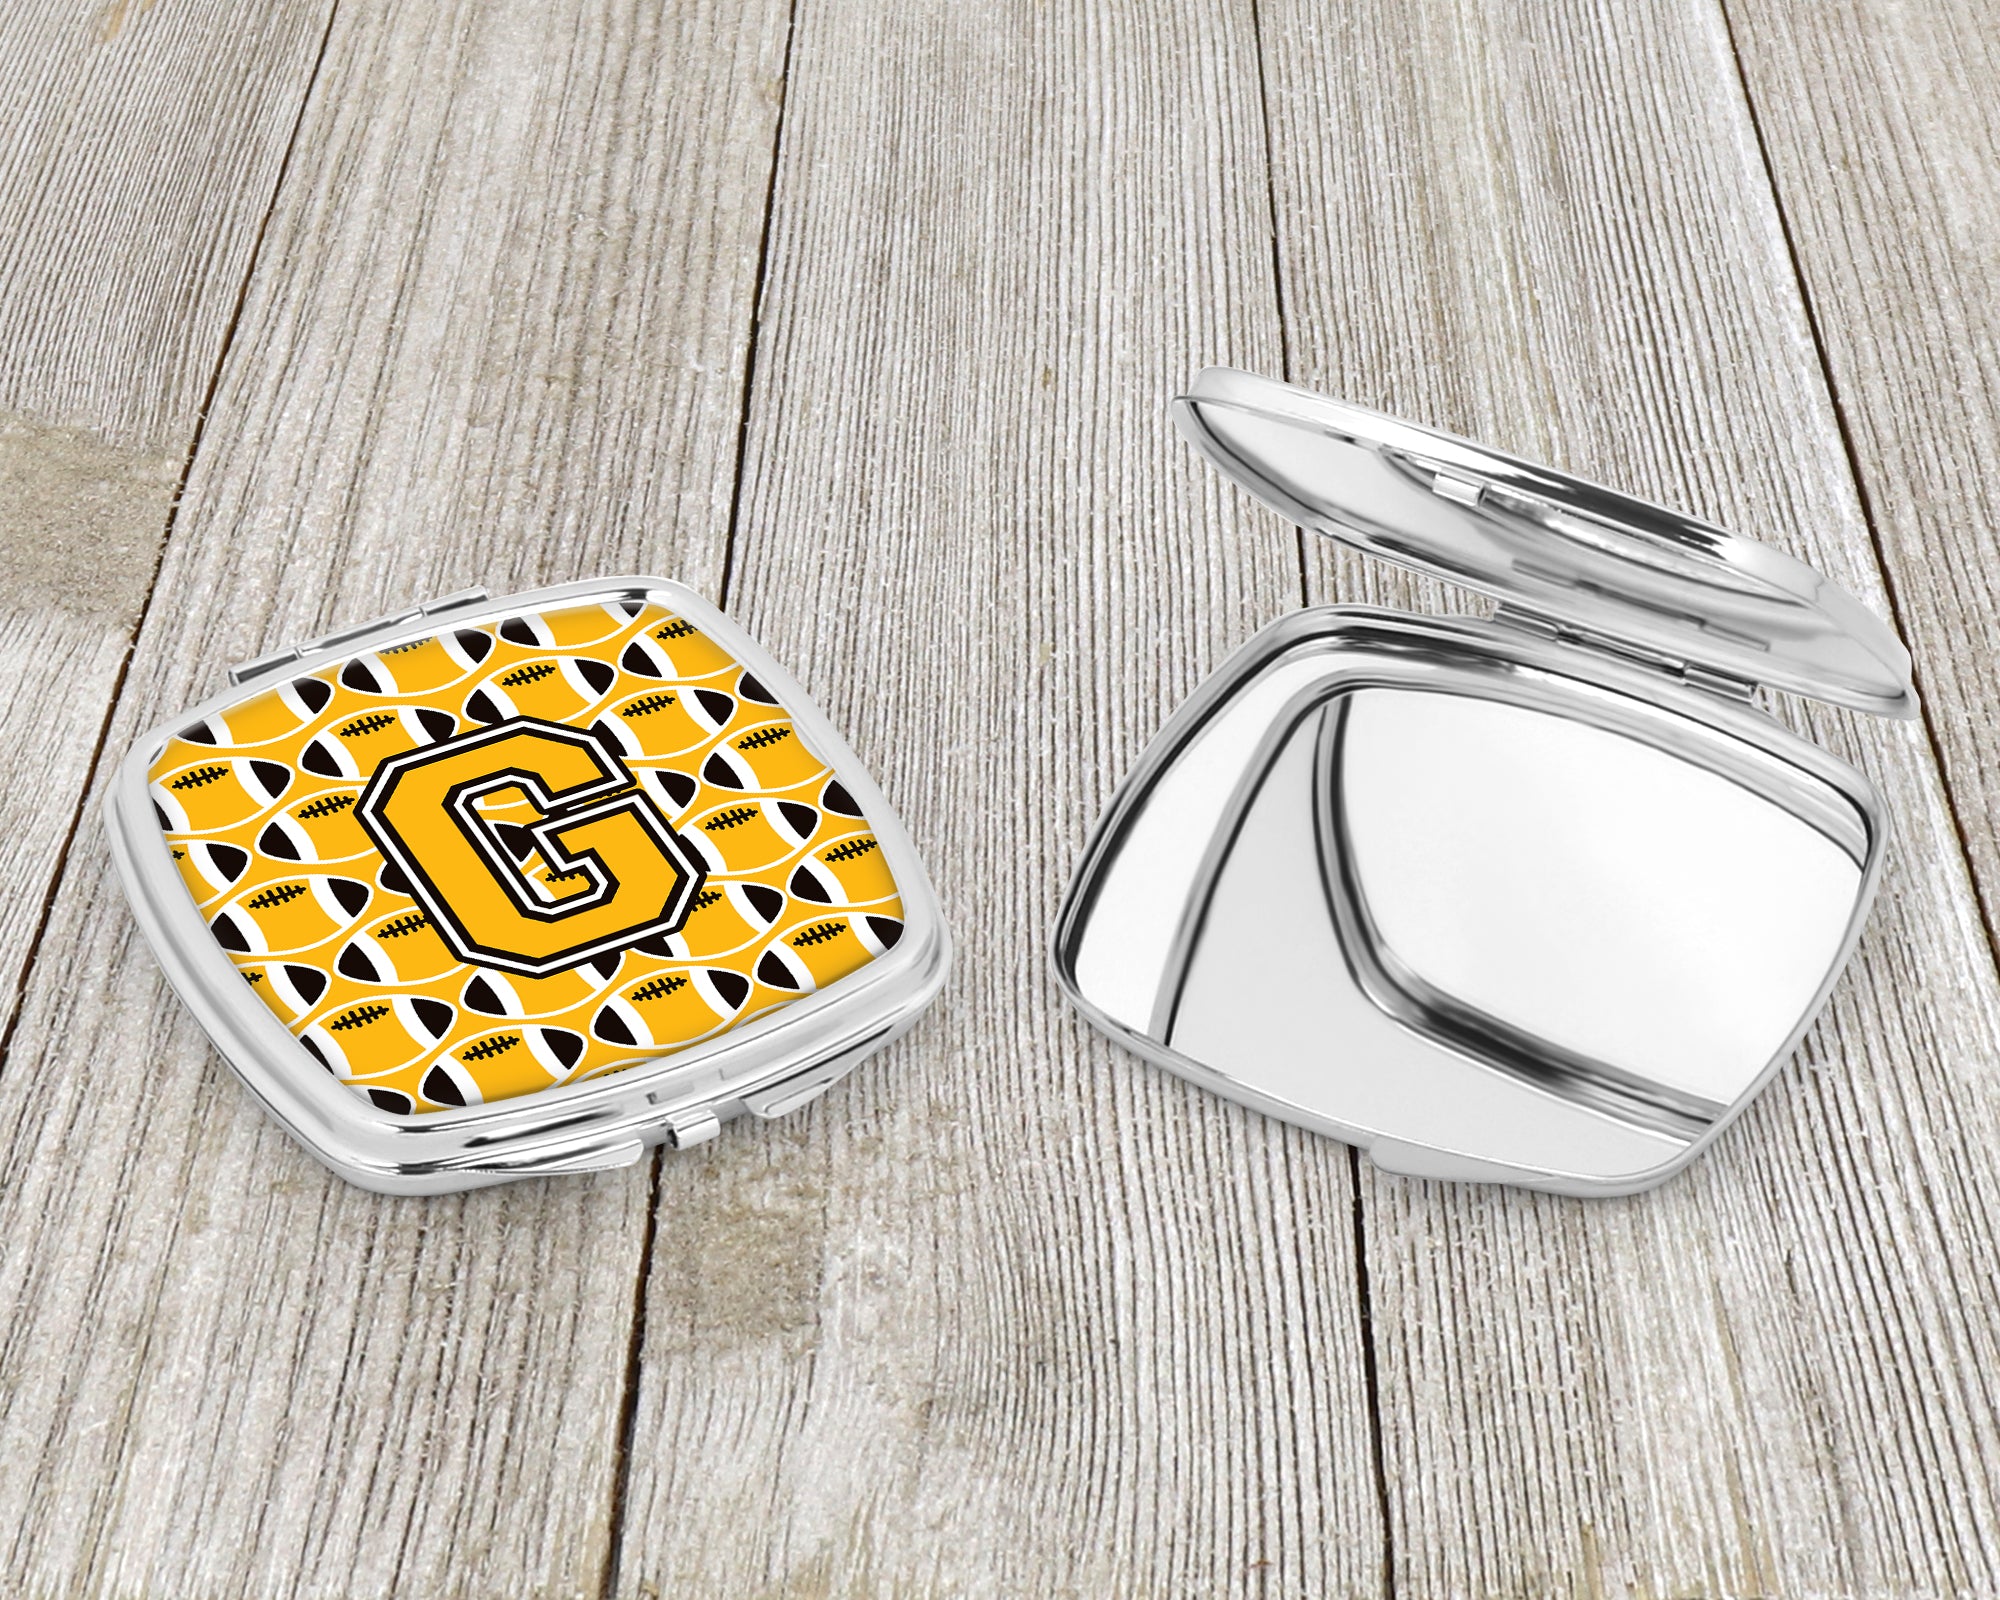 Letter G Football Black, Old Gold and White Compact Mirror CJ1080-GSCM  the-store.com.